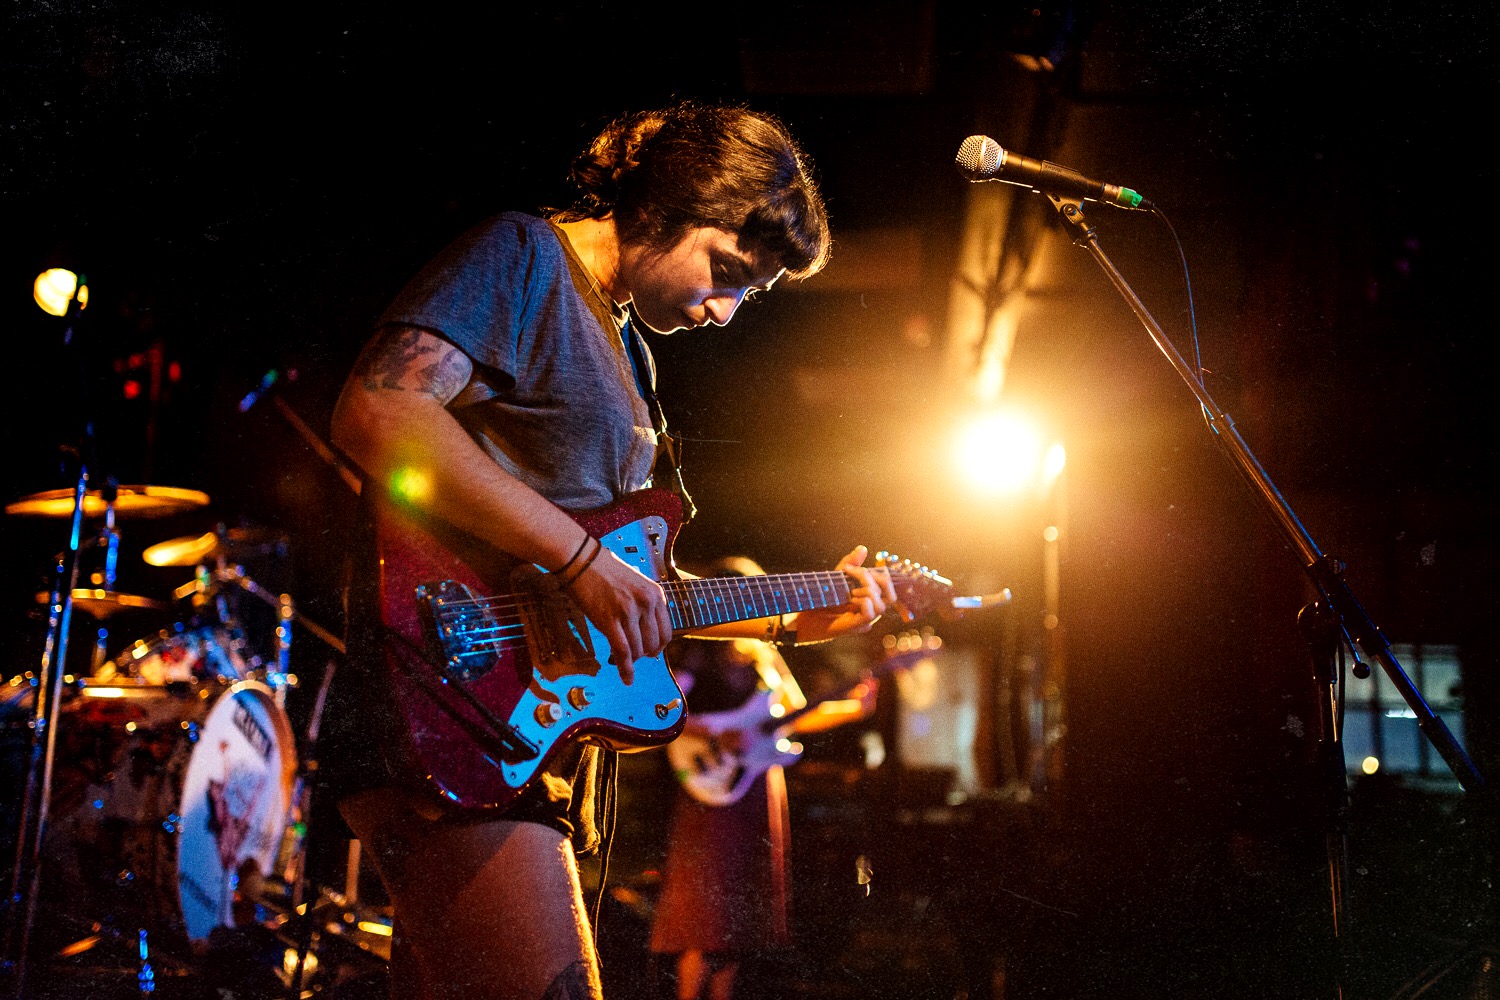 Camp Cope Tour with Worriers by Matt Walter